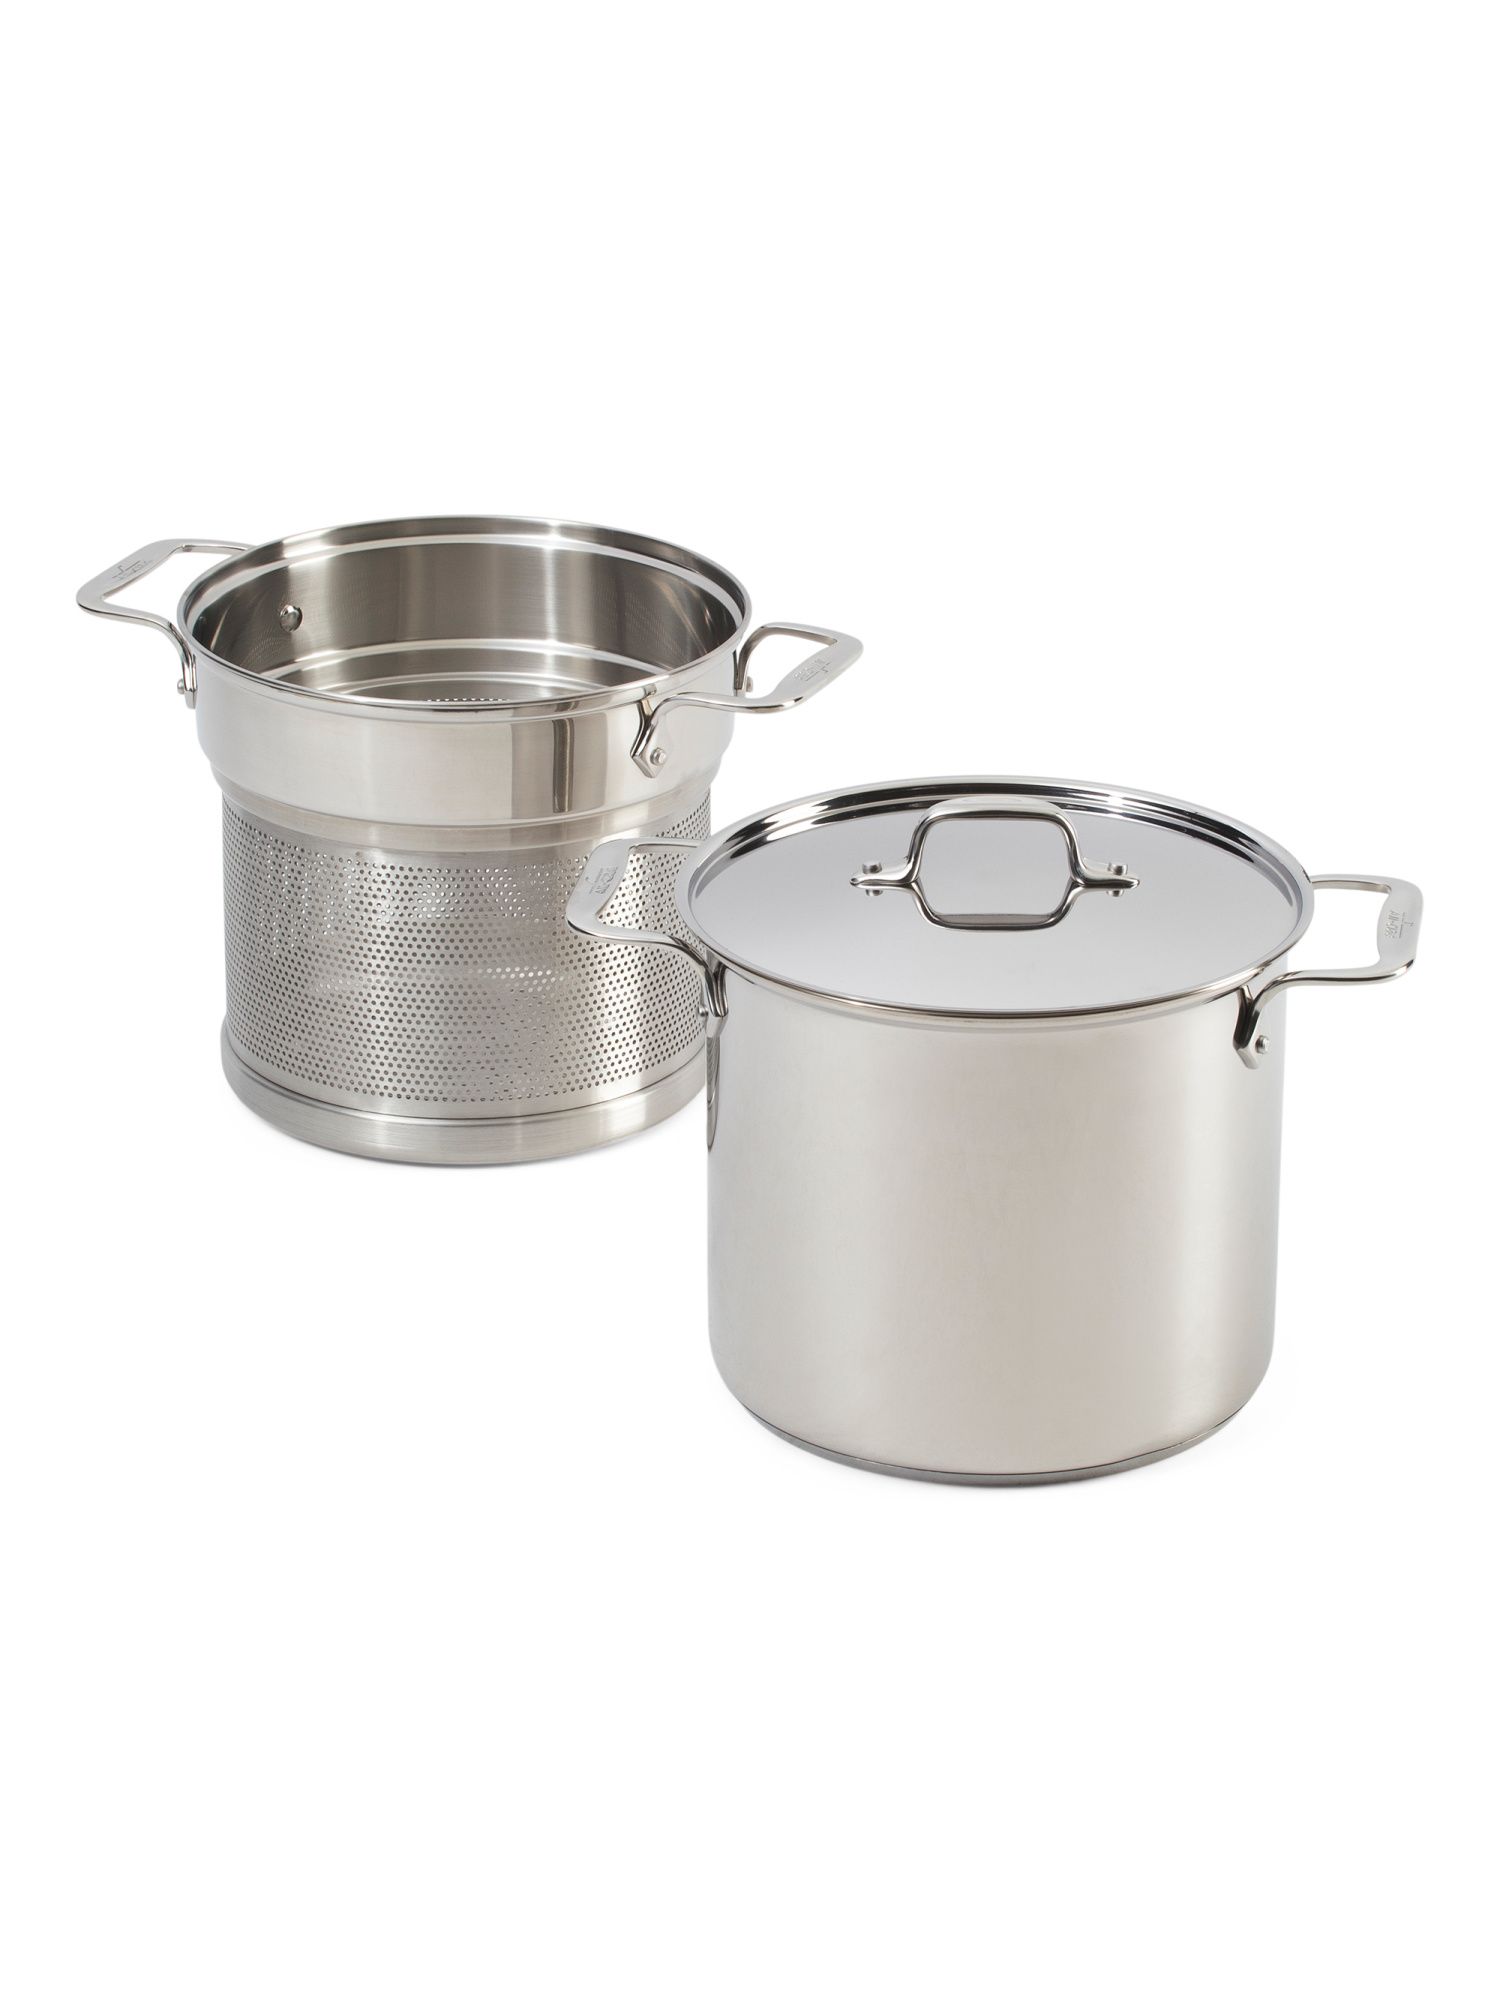 8qt Stainless Steel Pasta Pot With Insert Slightly Blemished | Marshalls